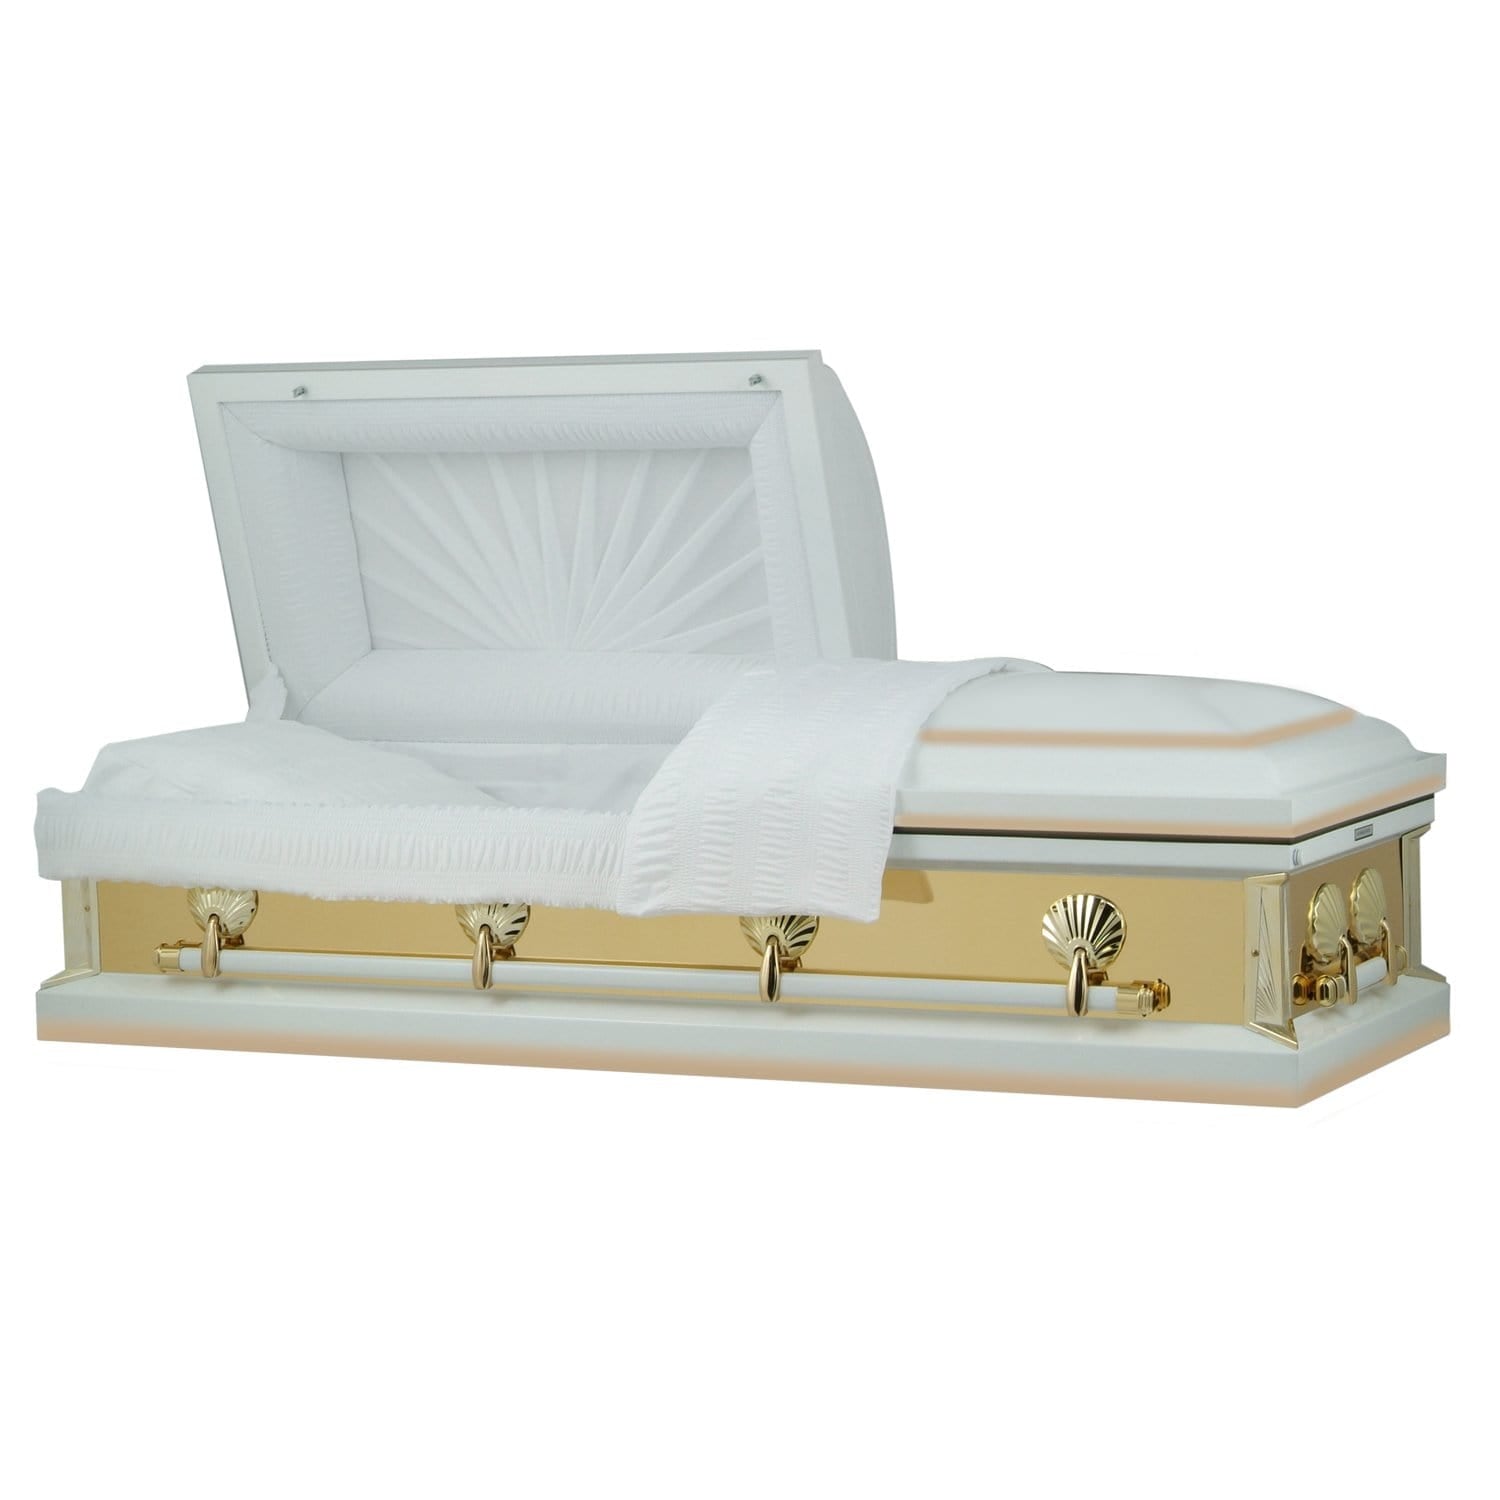 Load image into Gallery viewer, Reflections Series | White and Gold Steel Casket with White Interior - Titan Casket
